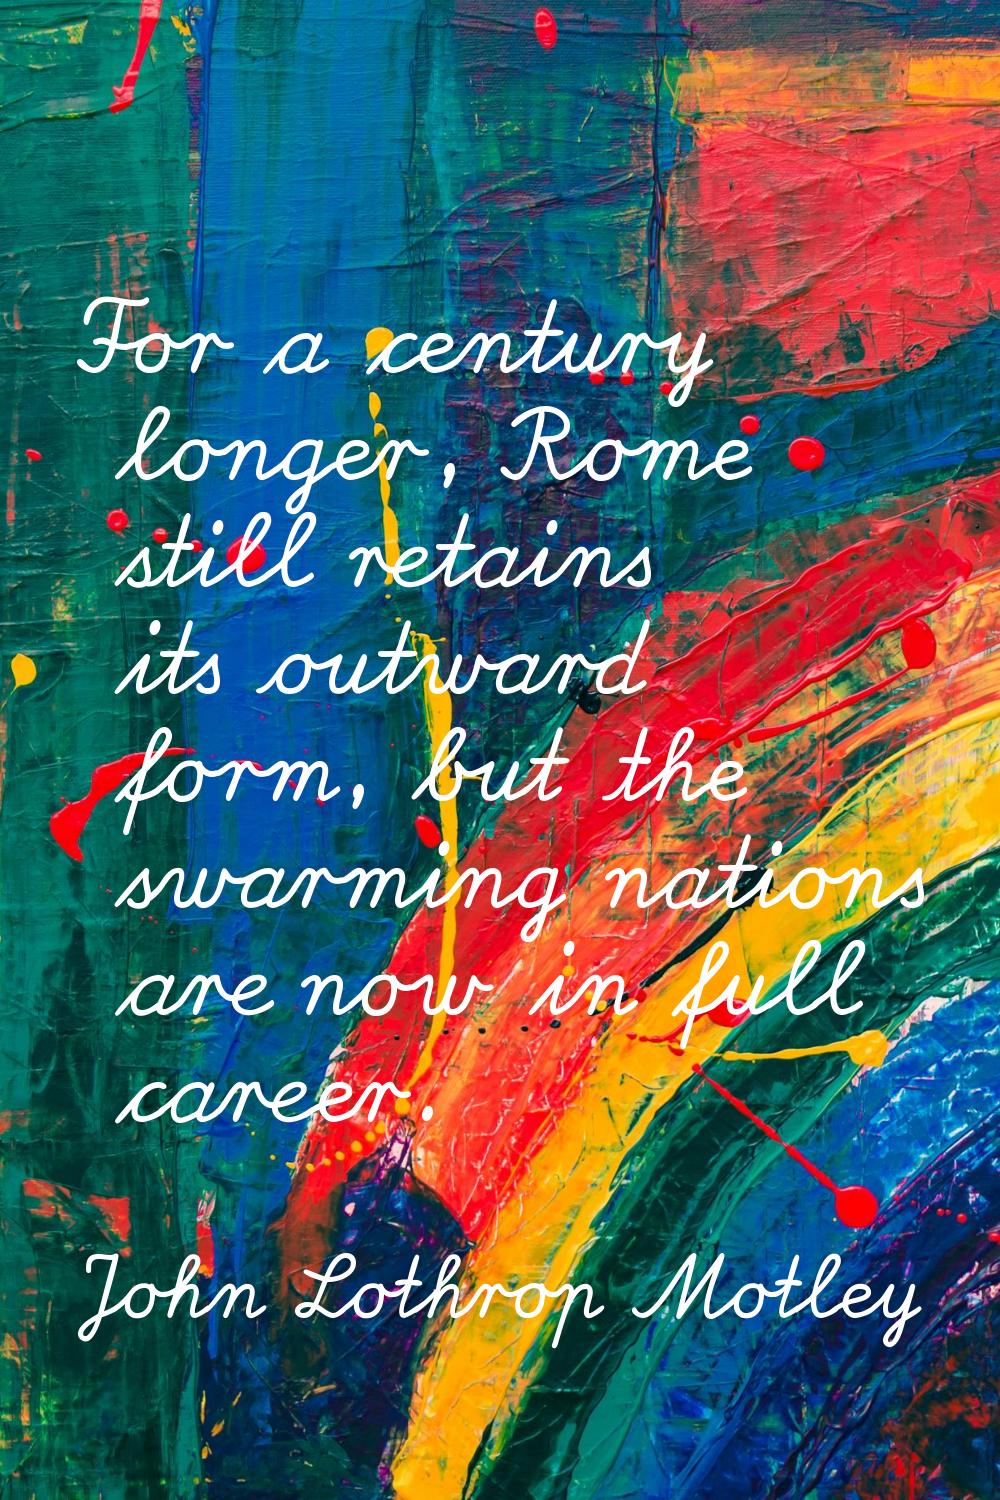 For a century longer, Rome still retains its outward form, but the swarming nations are now in full